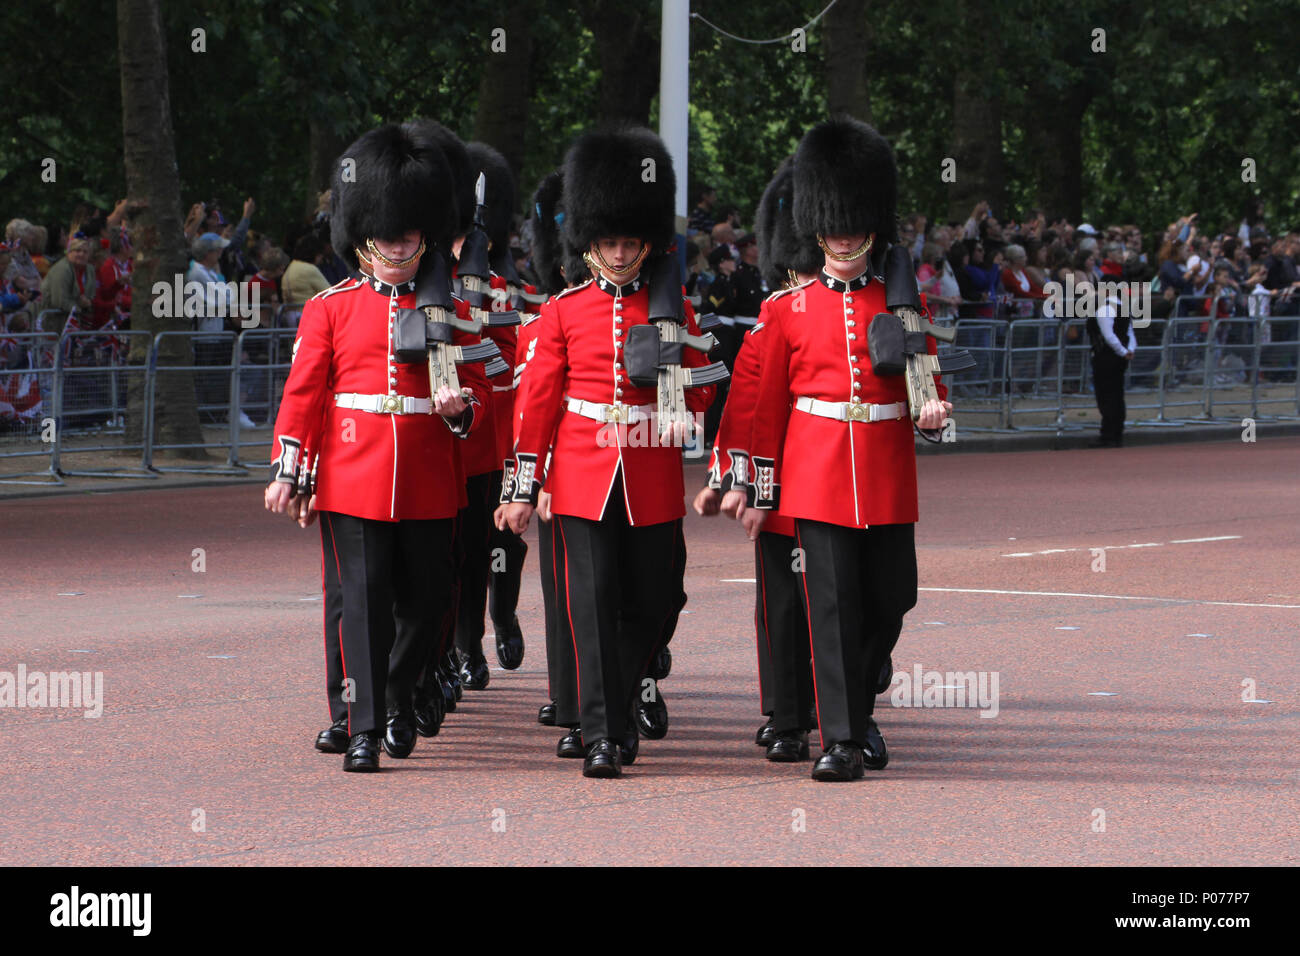 London, UK 9 June 2018: Hundreds of Guardsmen march along the Mall to the Horse Guards Parade Ground as they make their way to the Horse Guards Parade Ground on 9 June 2018. Over 1400 parading soldiers, 200 horses and 400 musicians come together each June in a great display of military precision, horsemanship and fanfare to mark The Queen's official birthday. Credit: David Mbiyu Stock Photo